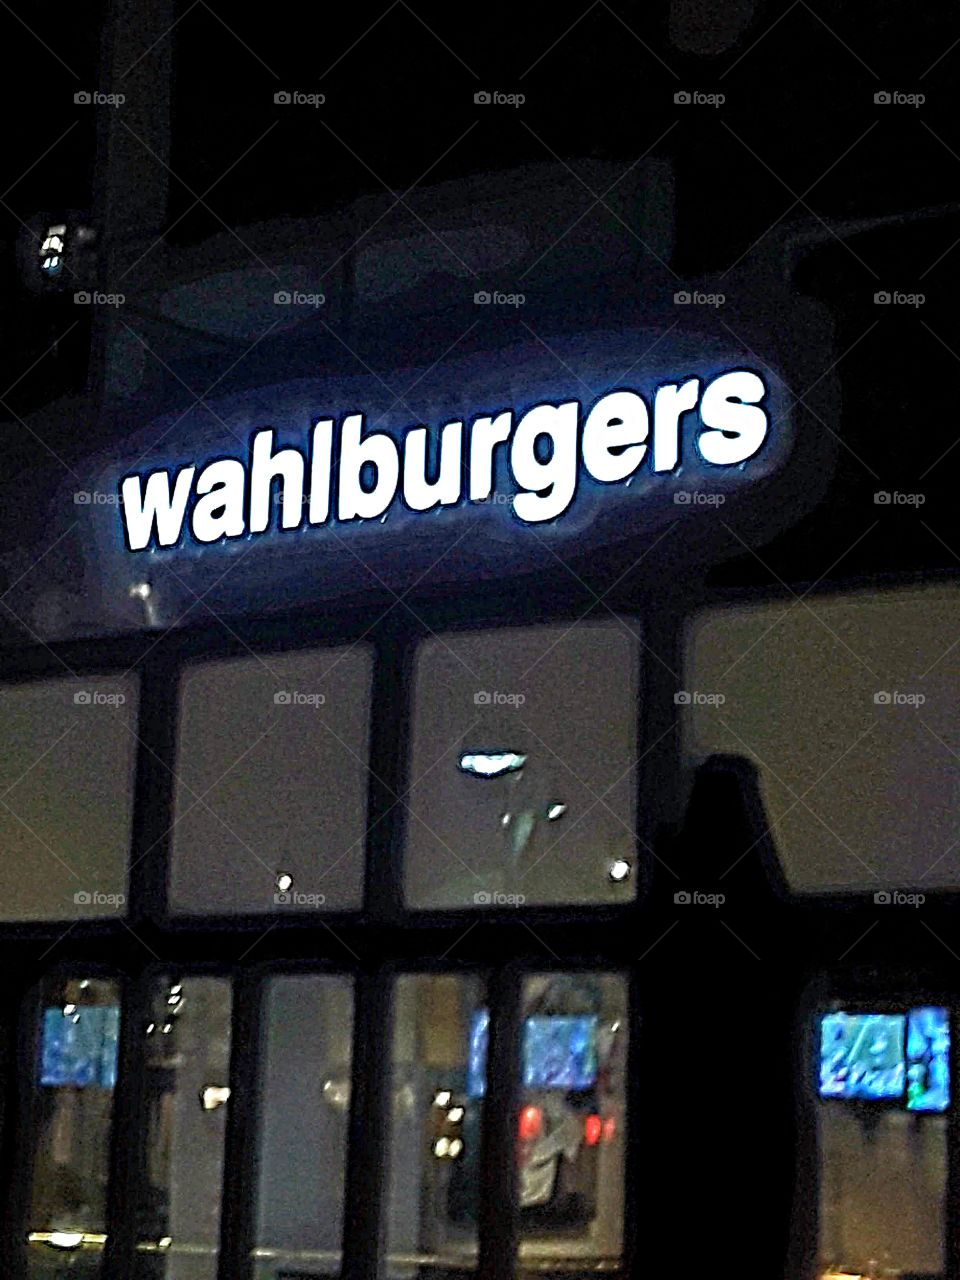 Boston's own Walburgers operated and named by the Movie Star Actors and Entertainers in Hollywood...